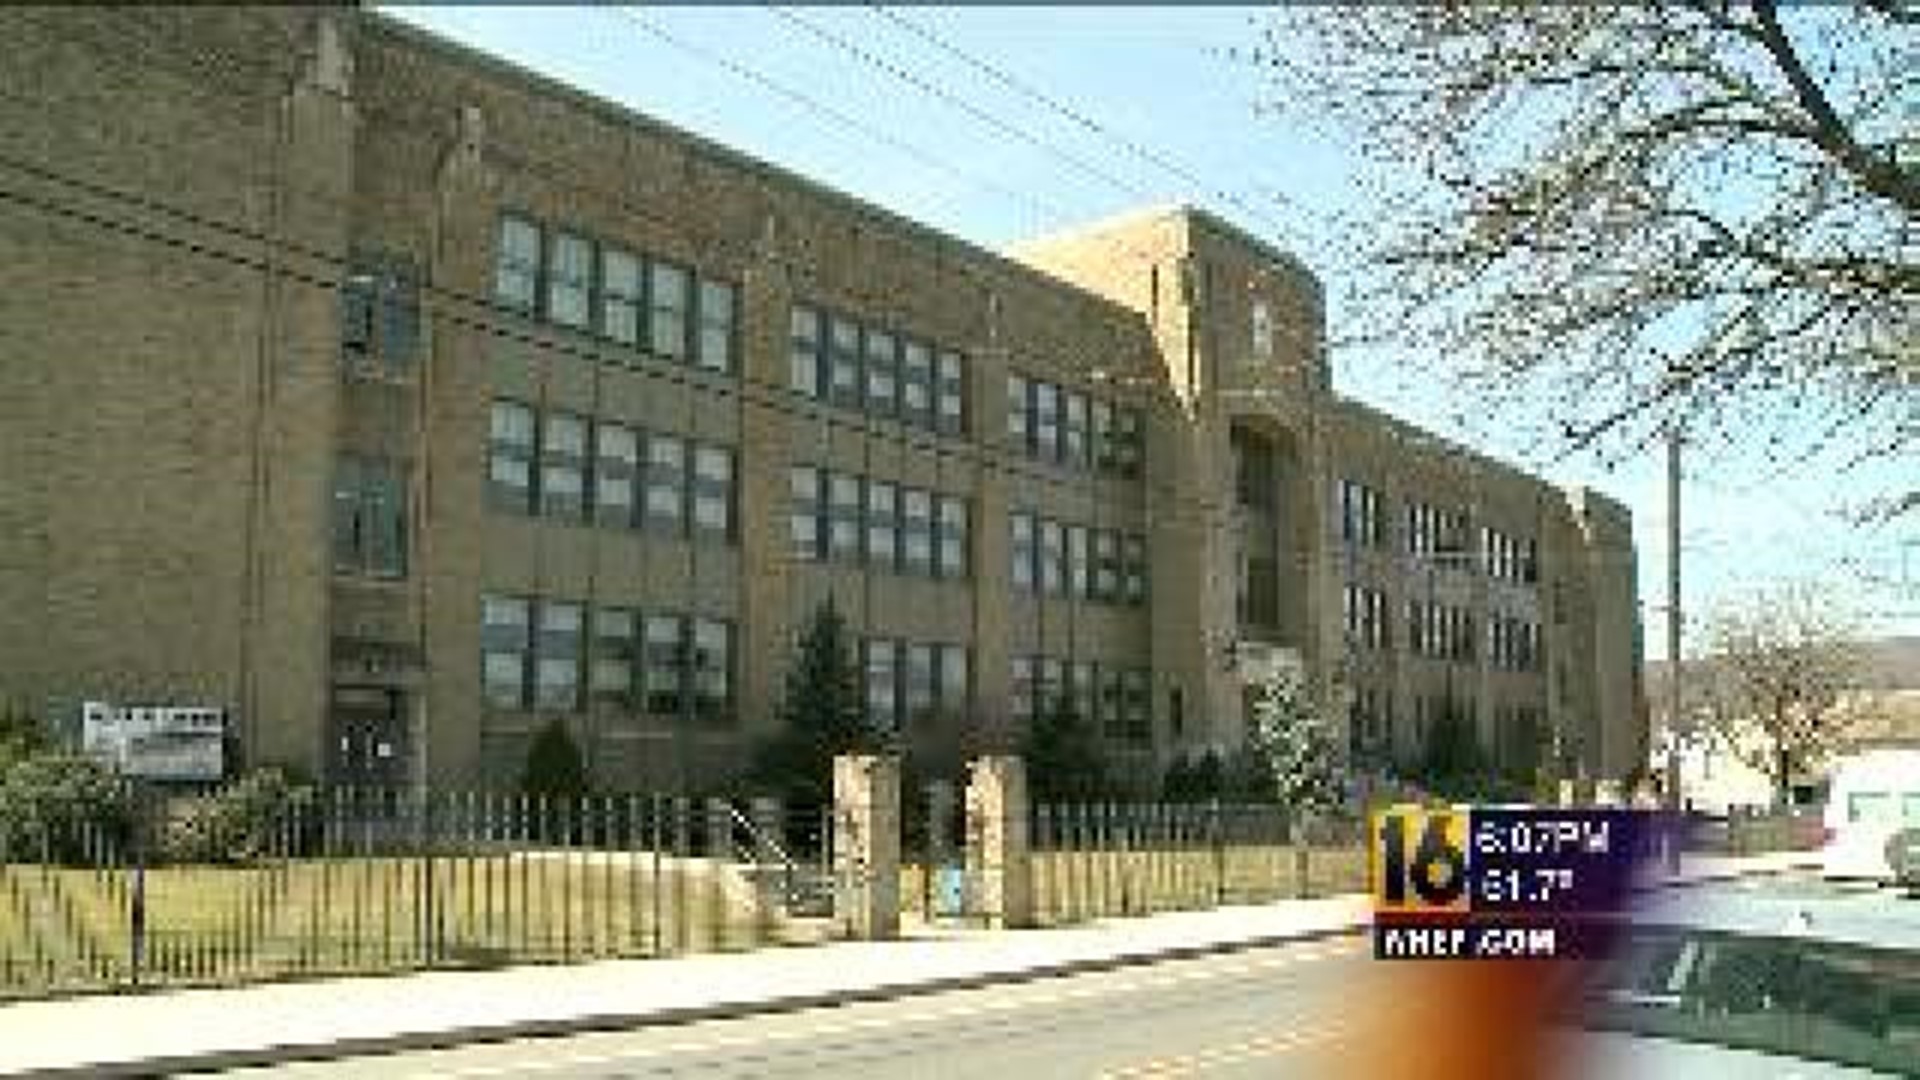 Bomb Threats: Students Serving Time in Class?